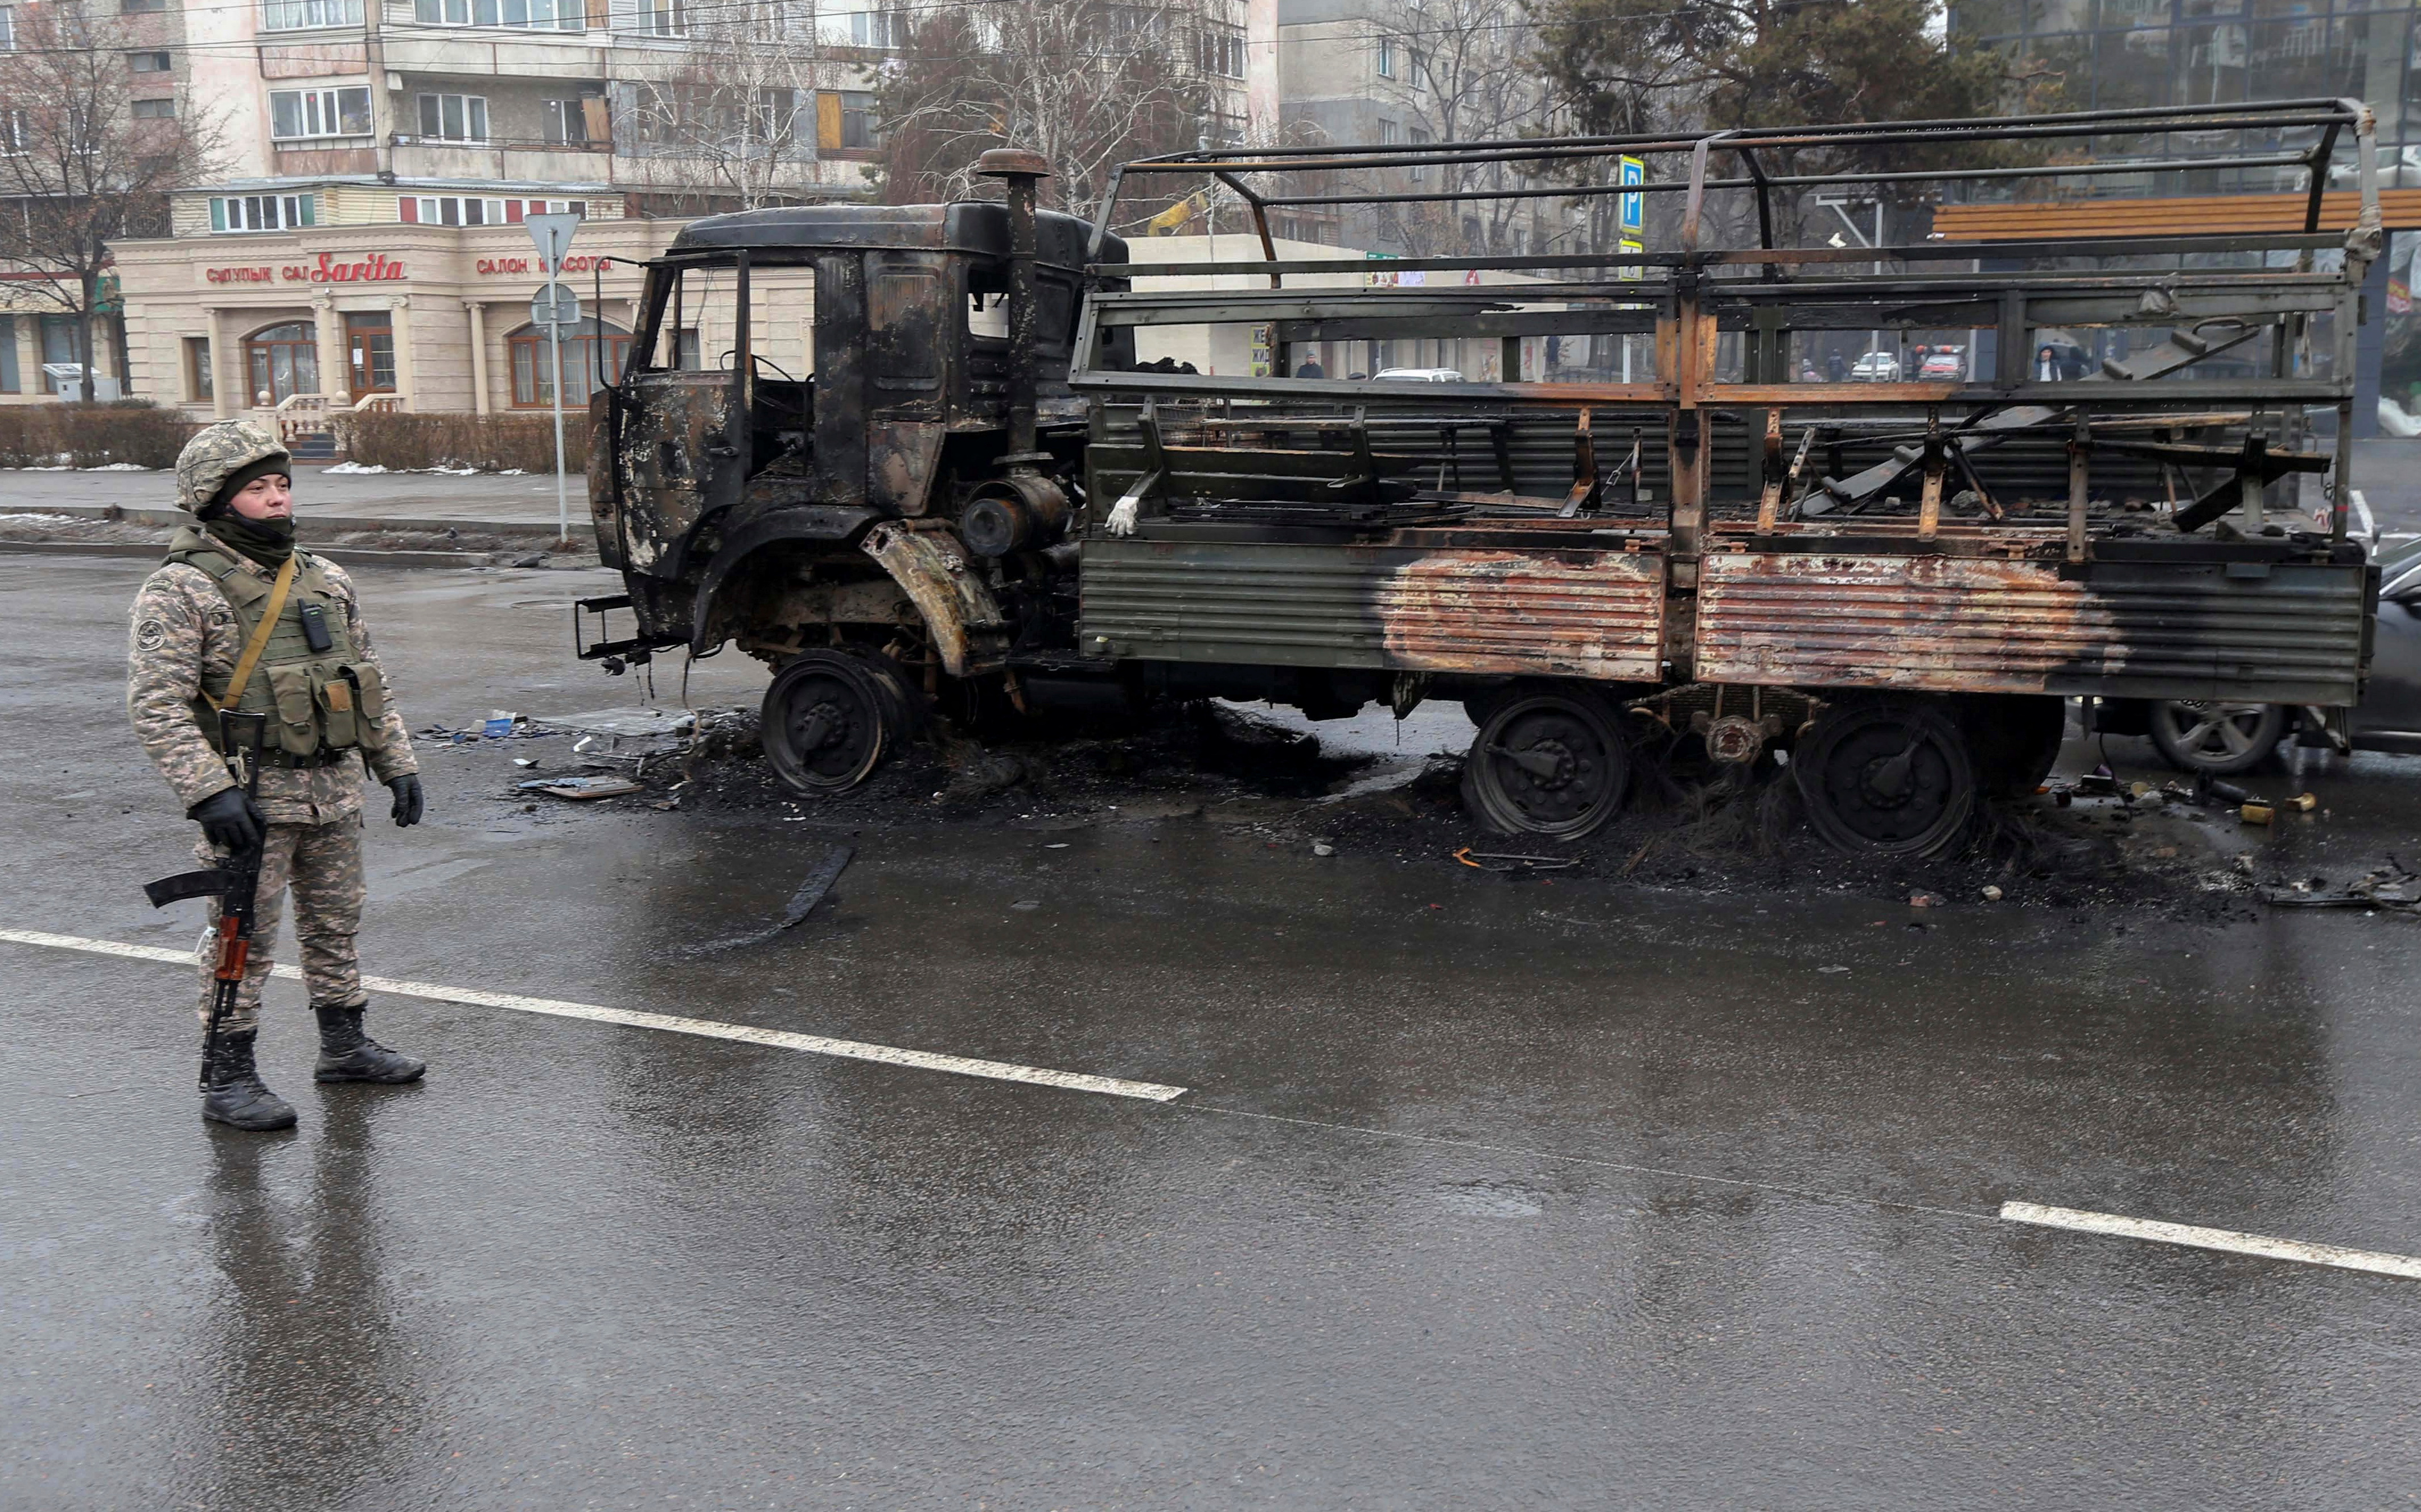 A Kazakh law enforcement officer stands guard near a burnt truck while checking vehicles in a street following mass protests triggered by fuel price increase in Almaty, Kazakhstan January 8, 2022. REUTERS/Pavel Mikheyev